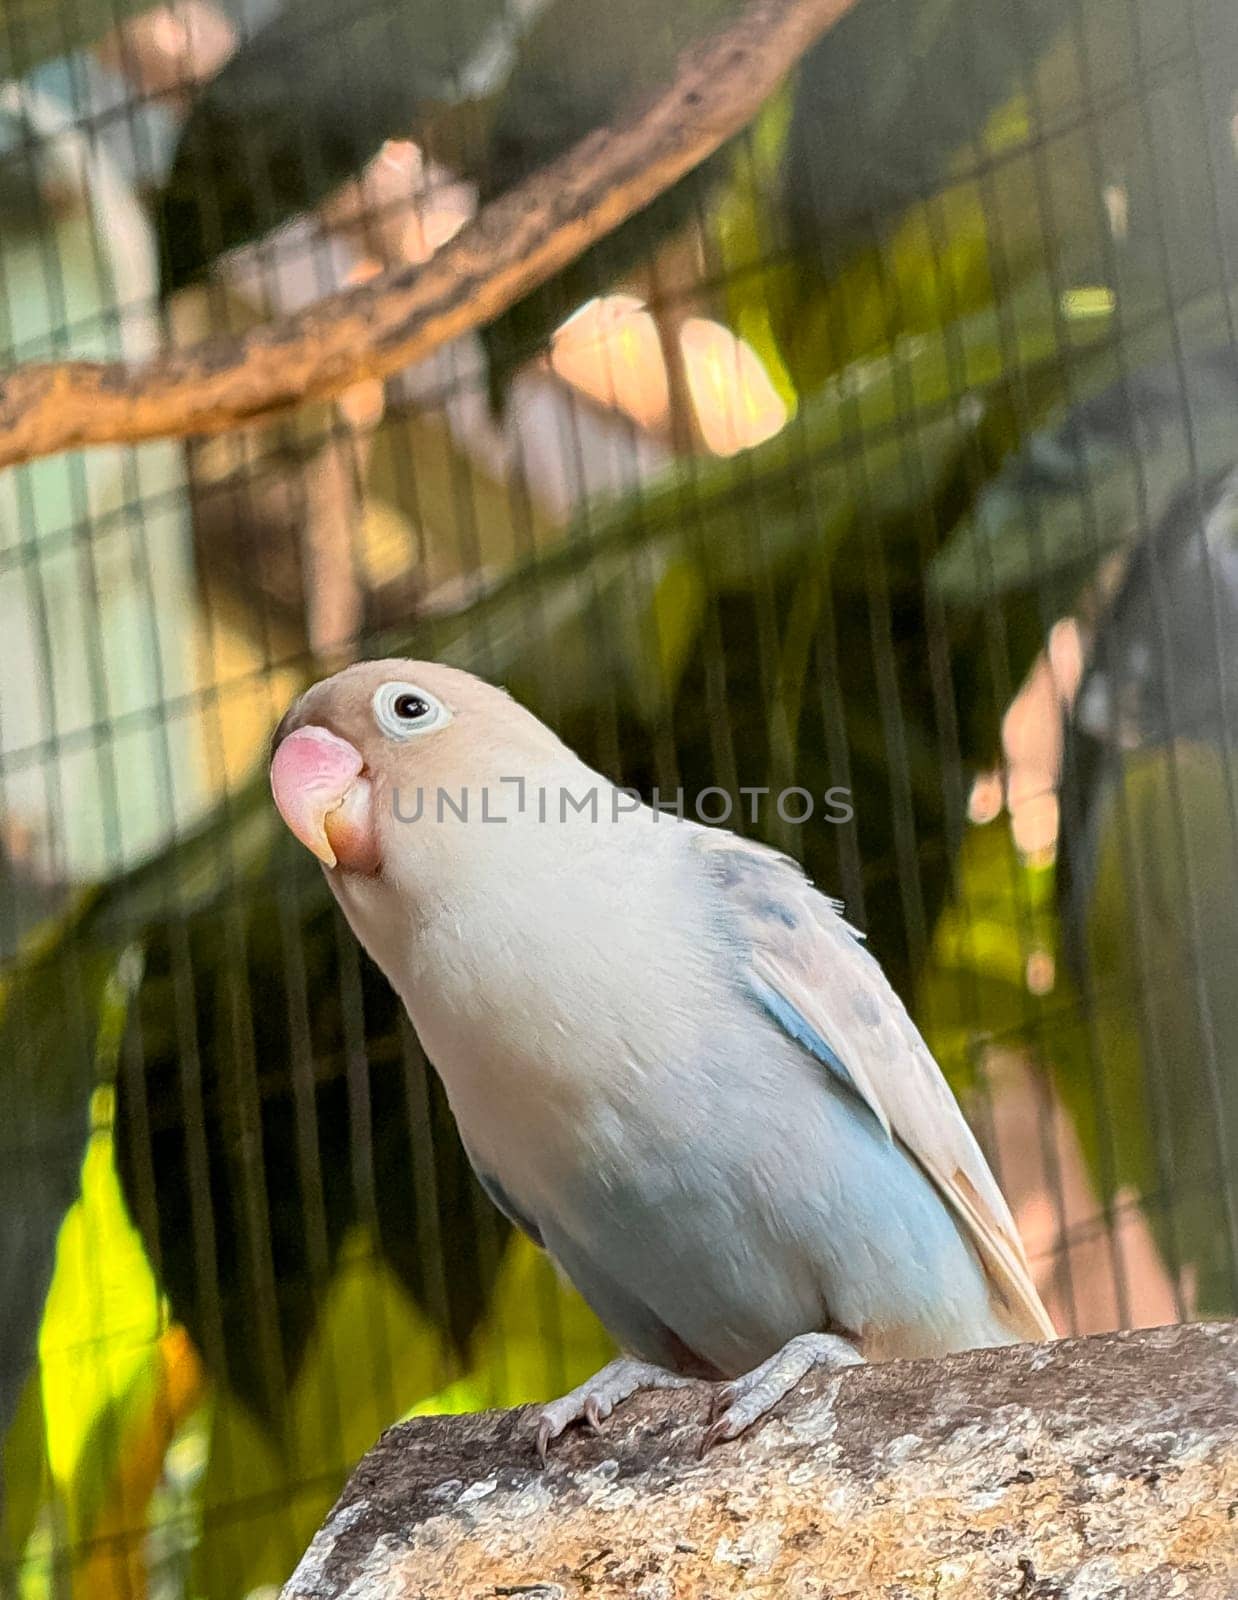 lovebirds are perched on a tree branch. This bird which is used as a symbol of true love has the scientific name Agapornis fischeri by antoksena